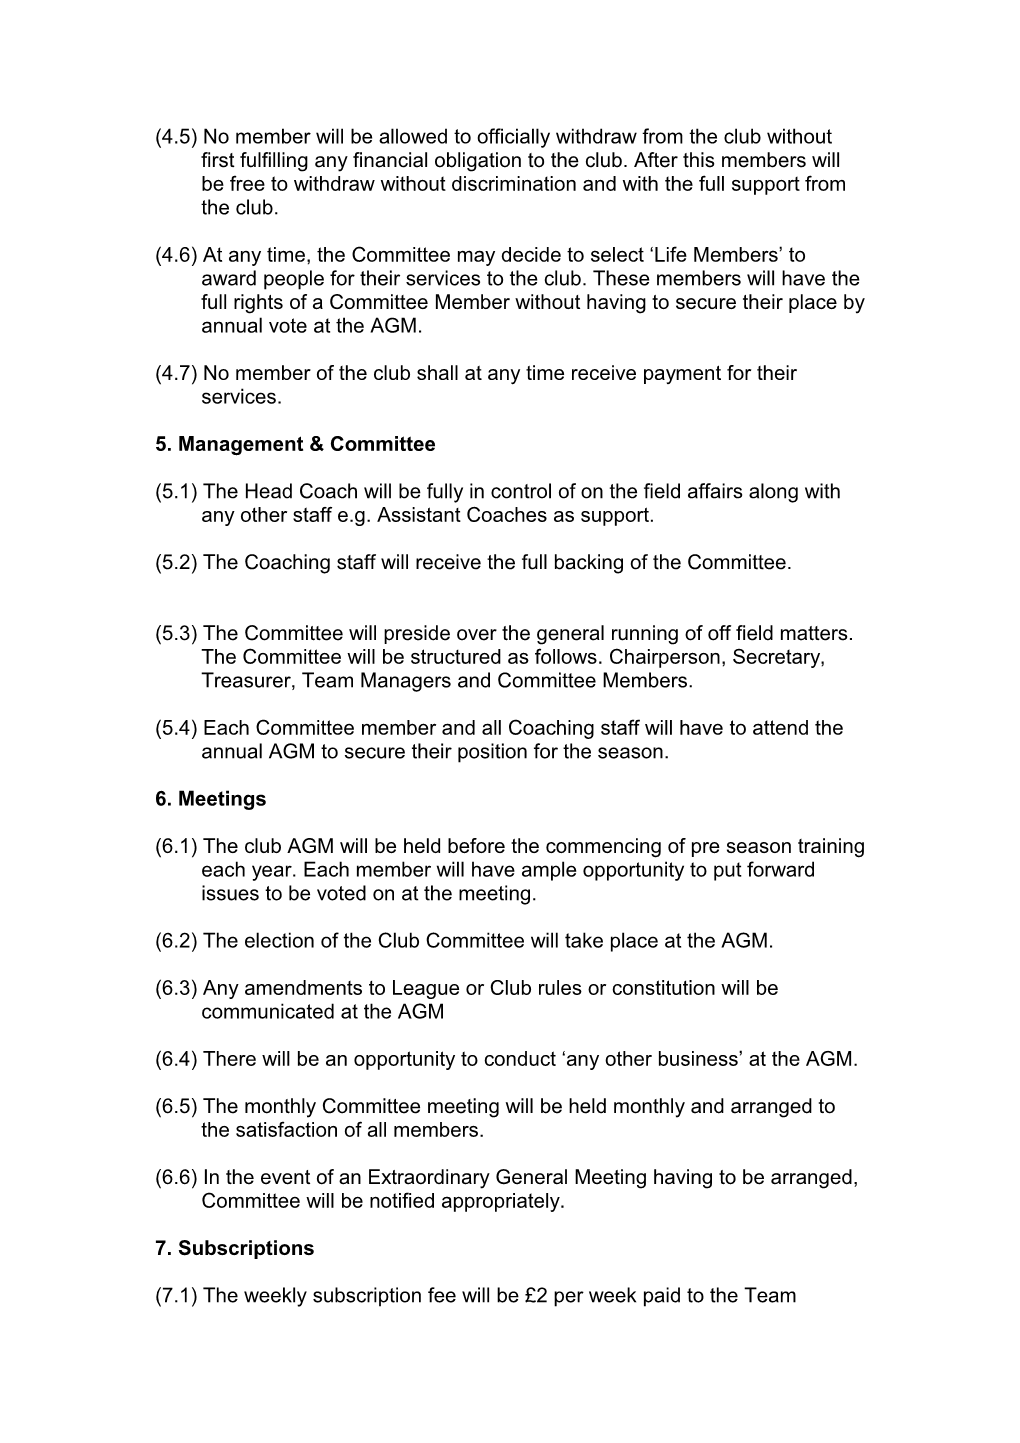 The Constitution and Rules of the Club